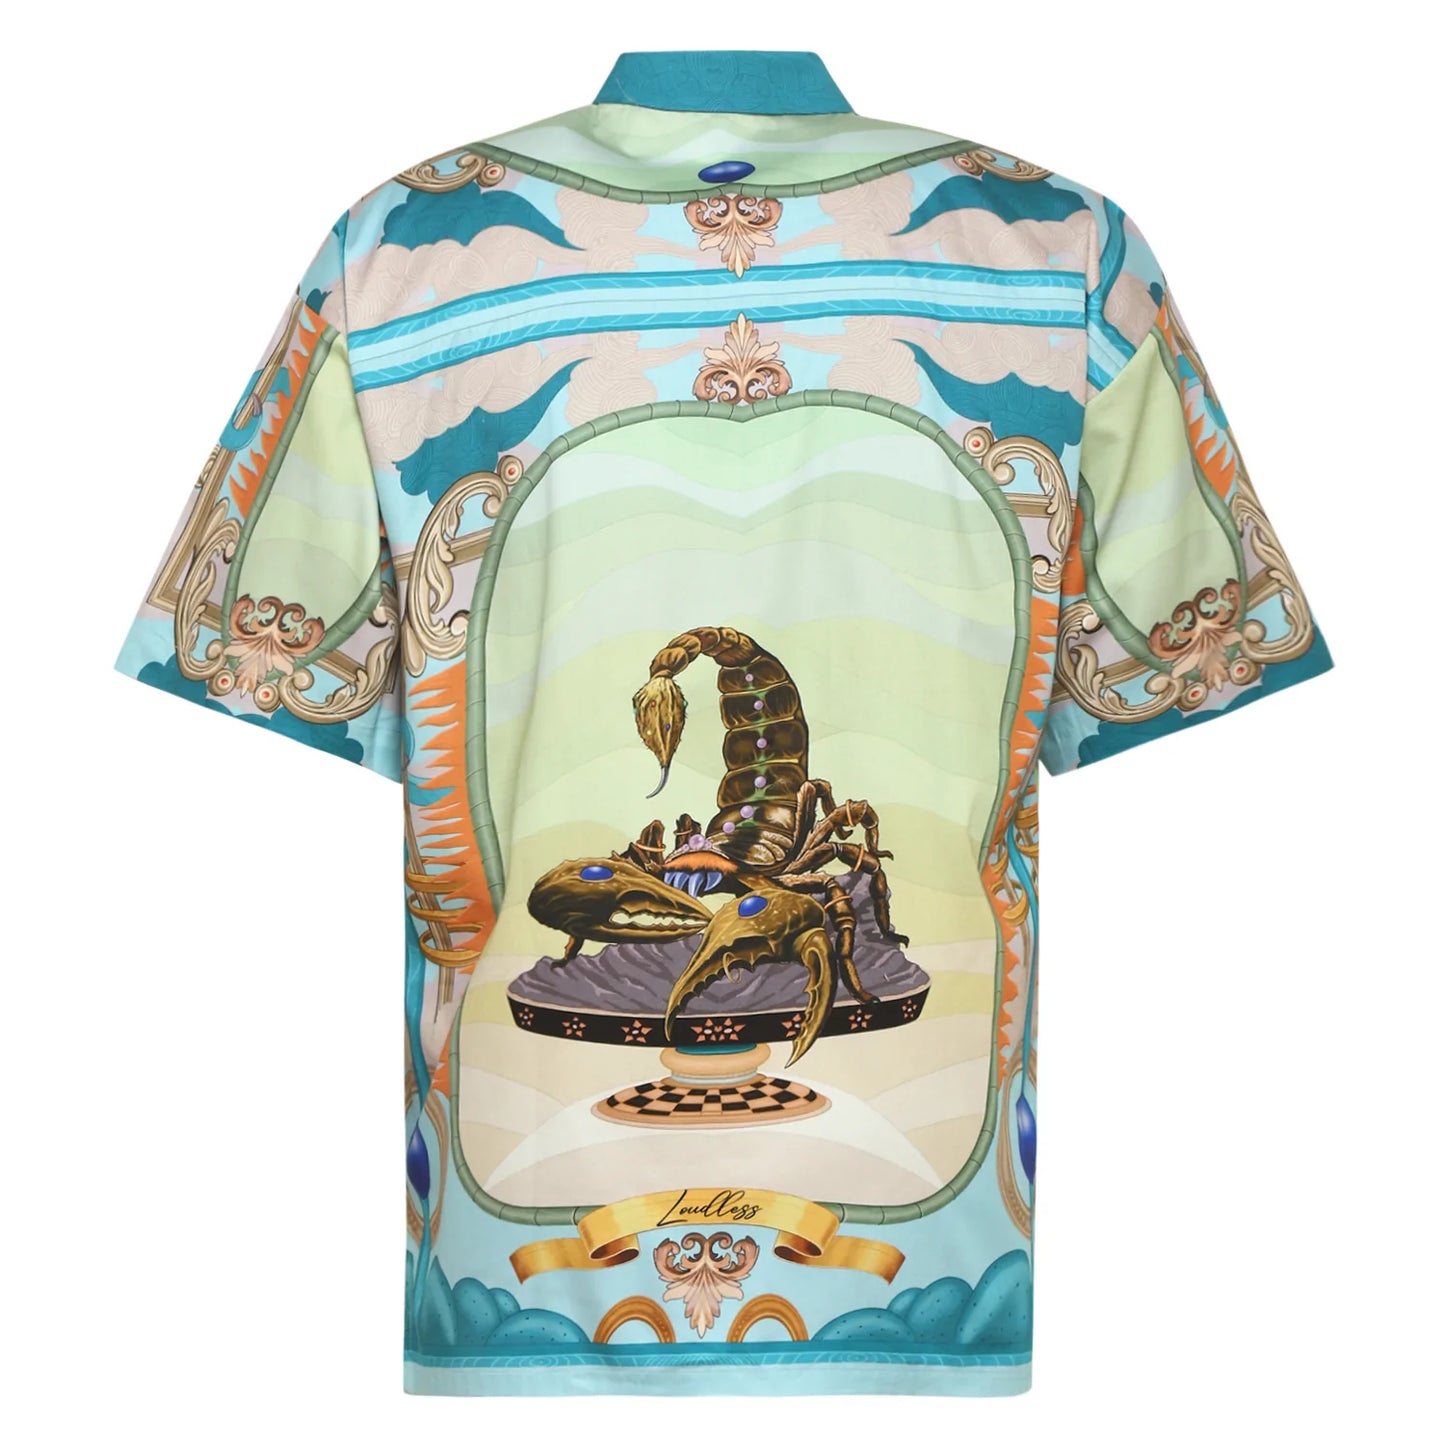 An eye-catching scorpion shirt in soft pastel colors, perfect for making a statement